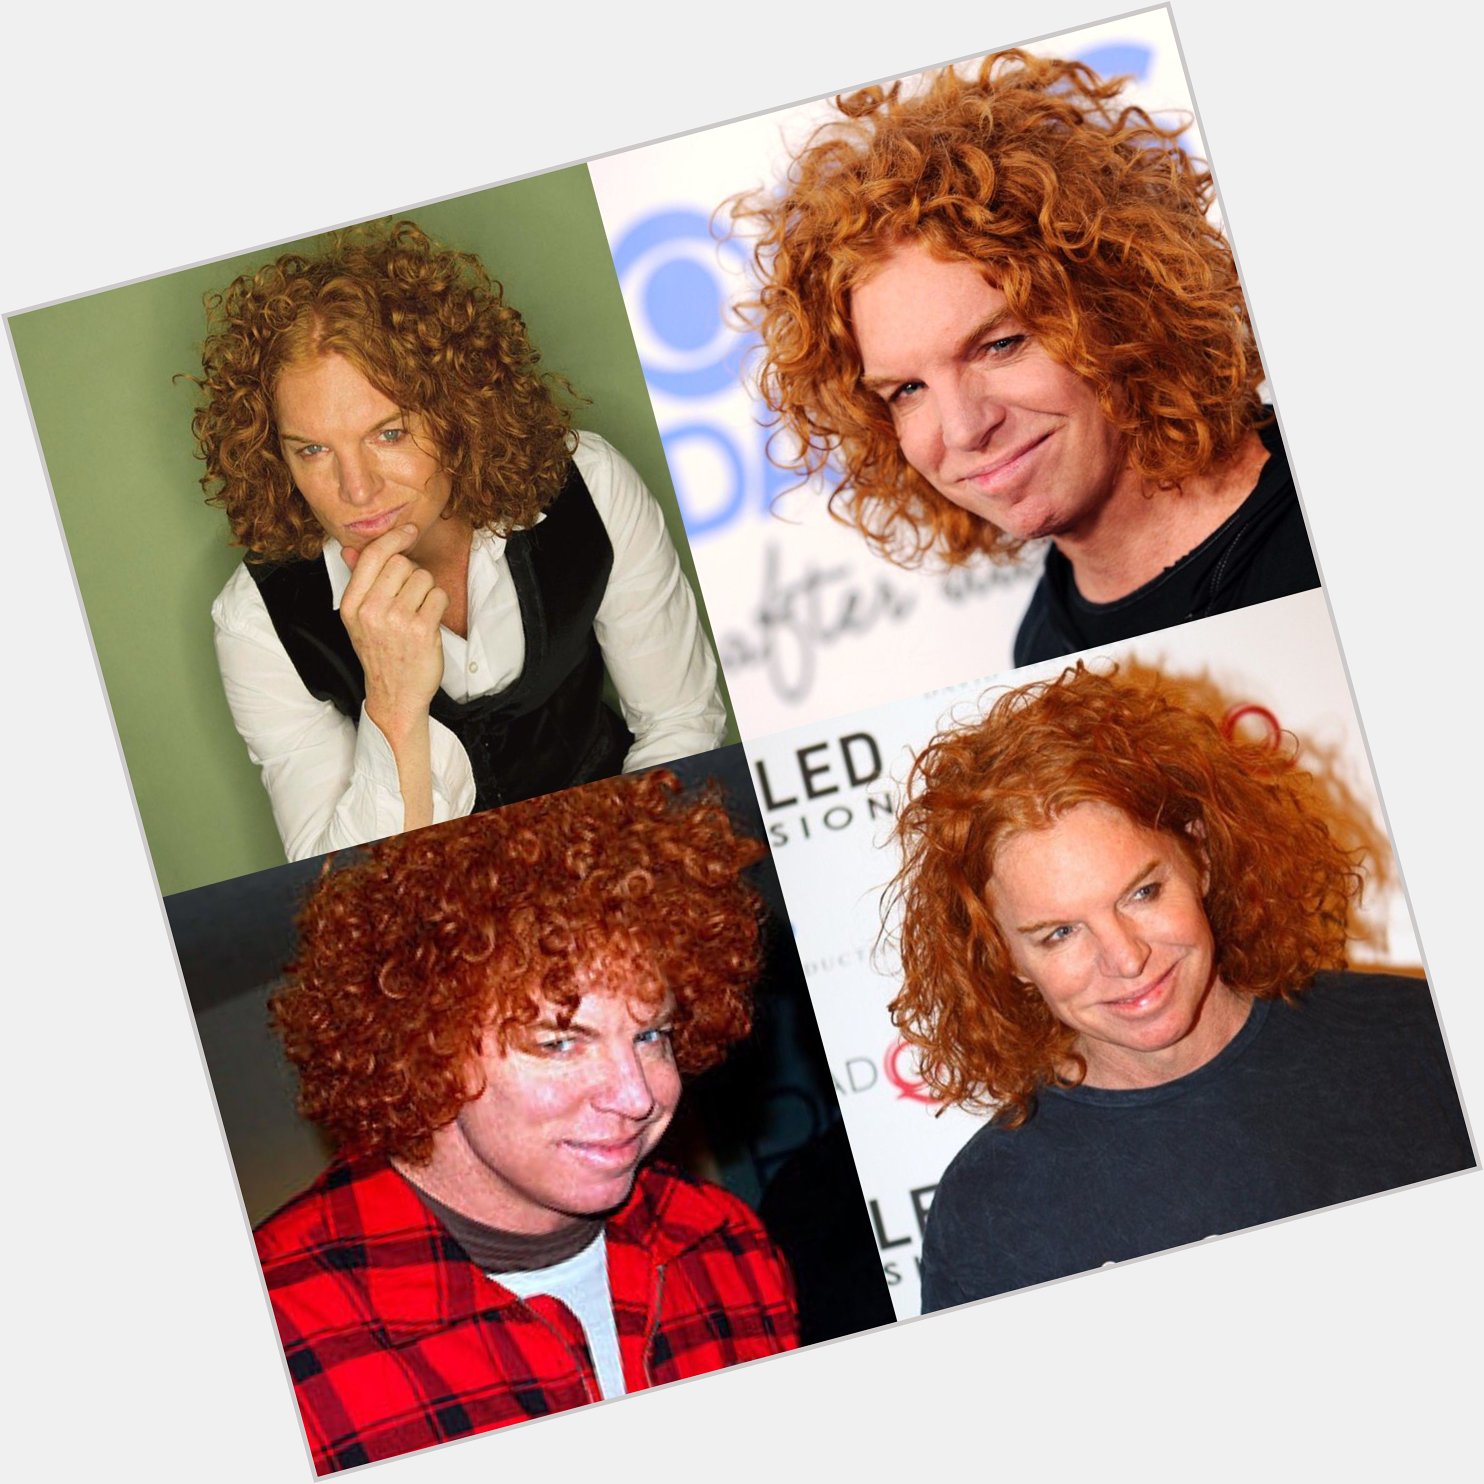 Happy 54 birthday to Carrot Top . Hope that he has a wonderful birthday.       